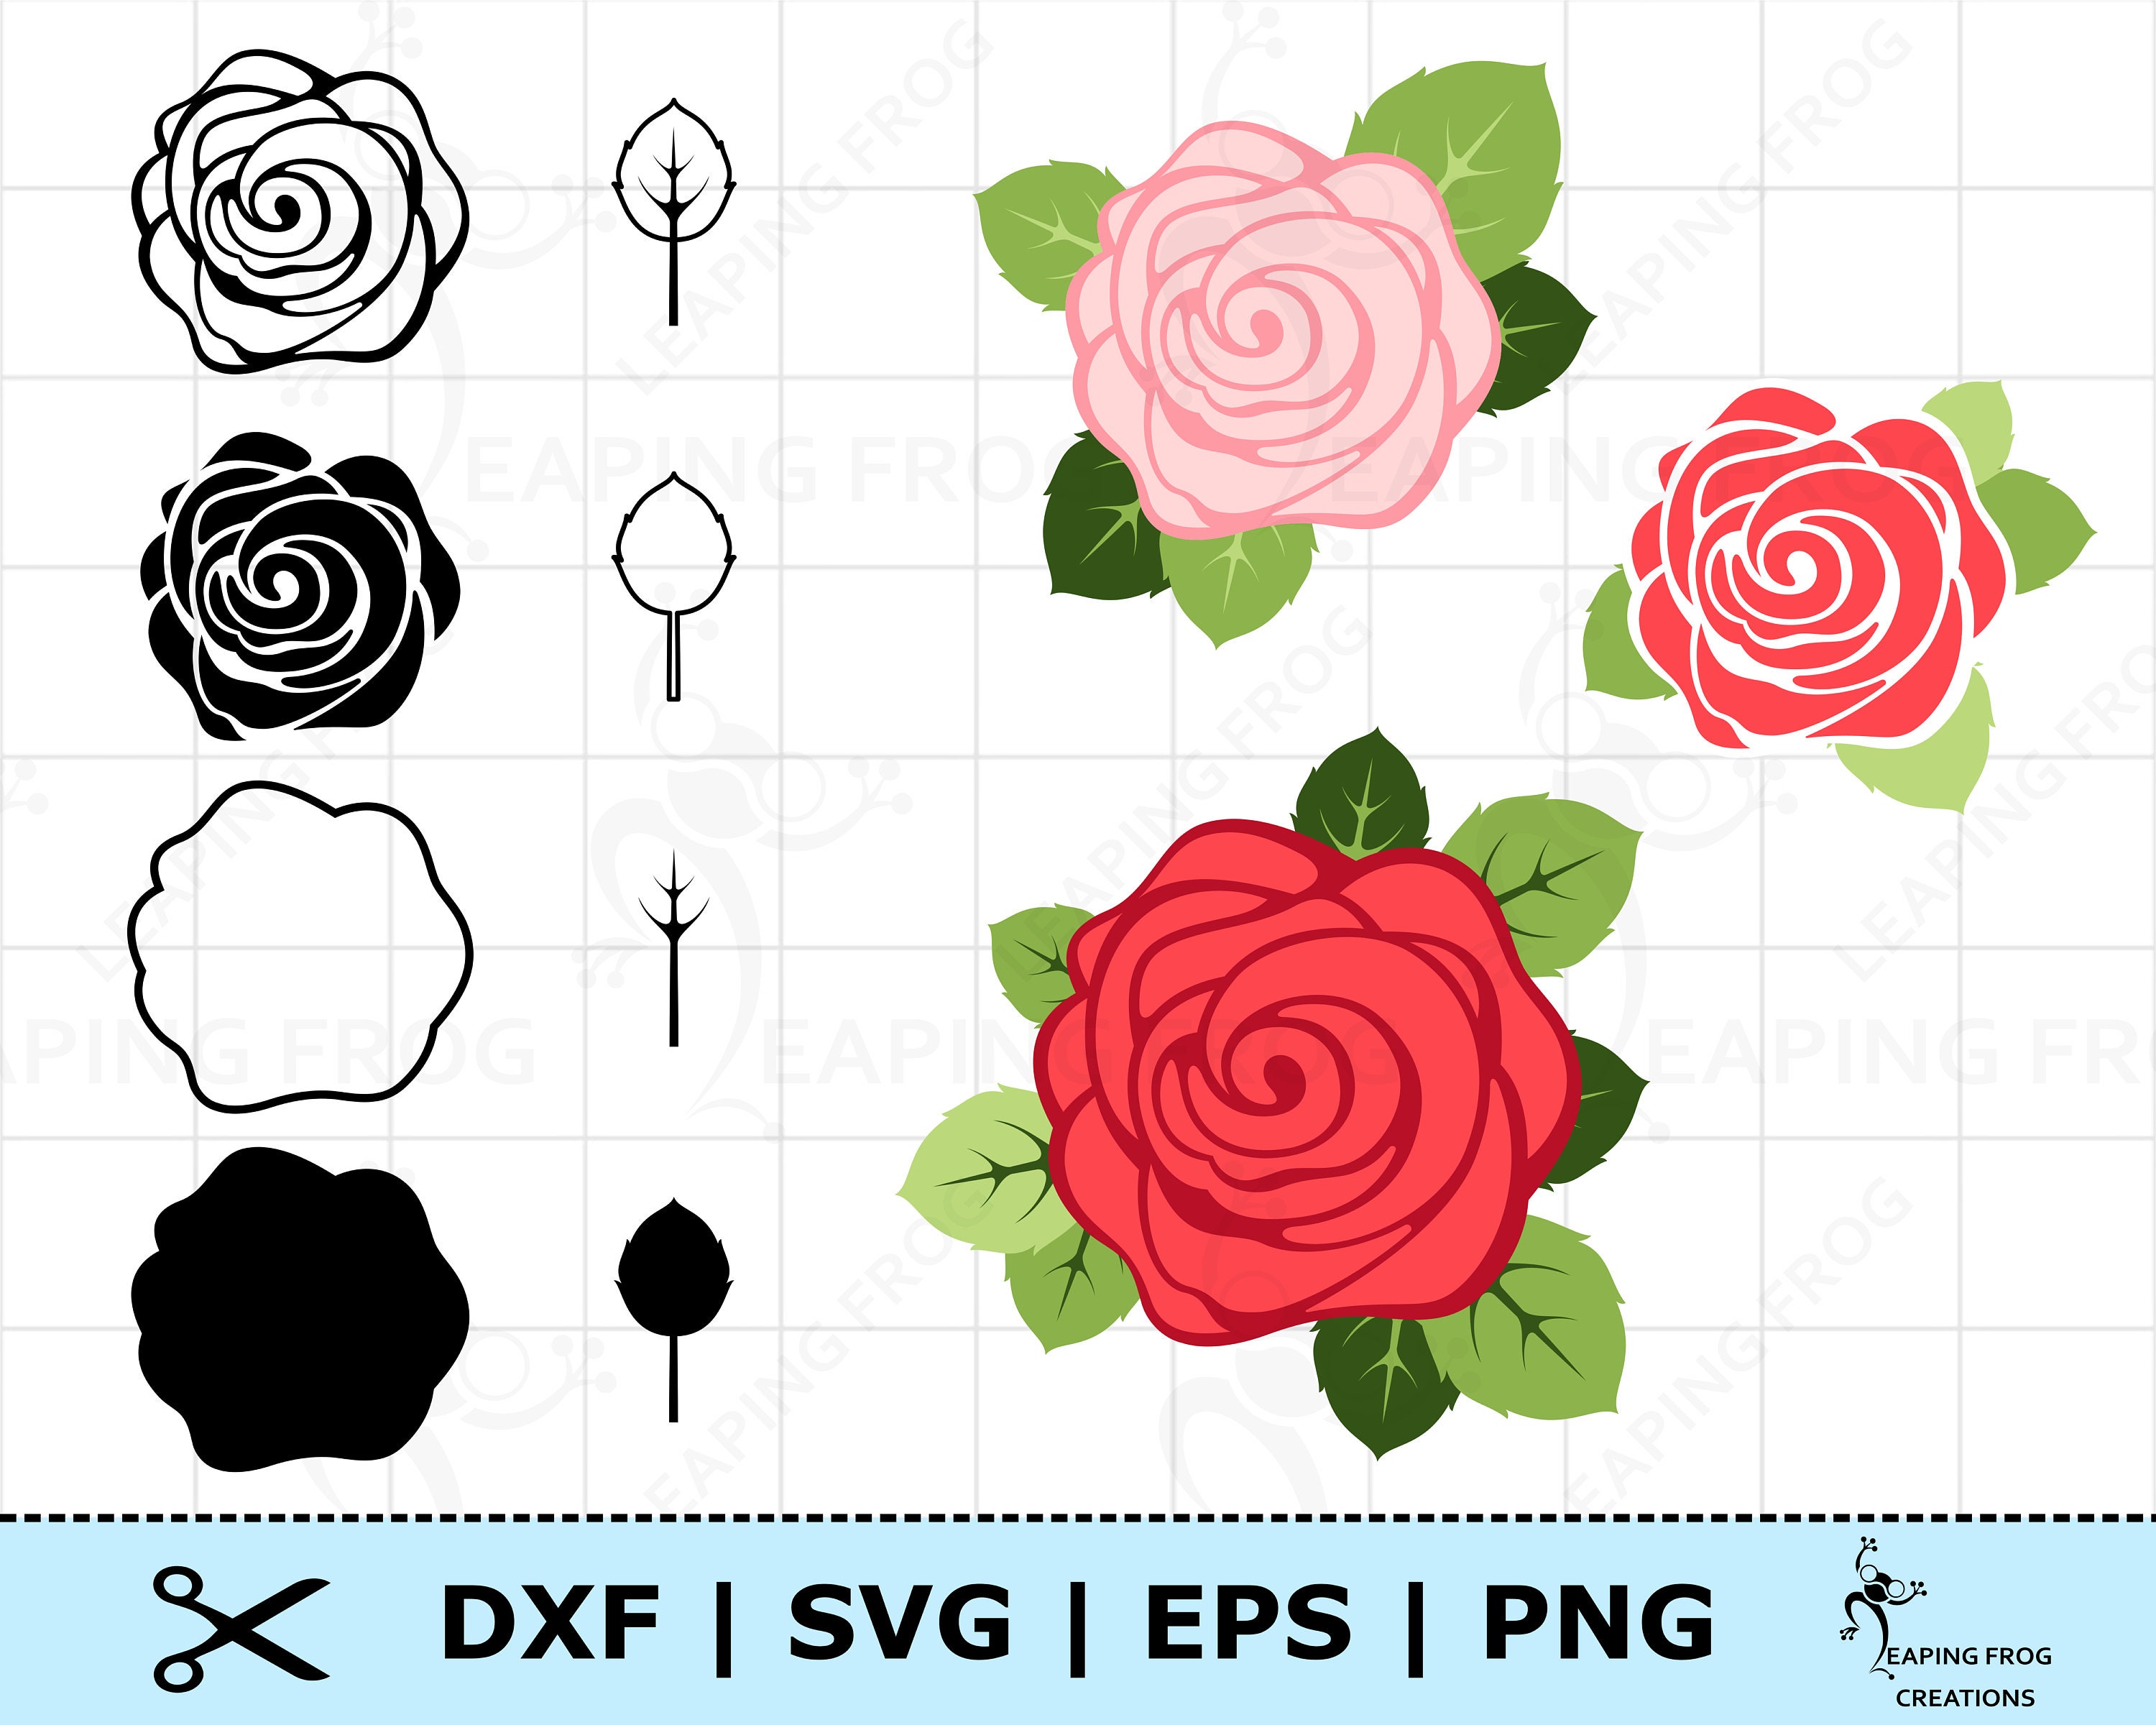 Red Rose SVG, Outlined Rose Svg, Red Flower Svg. Vector Cut file For  Silhouette, Cricut, Pdf Eps Png Dxf, Stencil, Decal, Pin, Sticker.